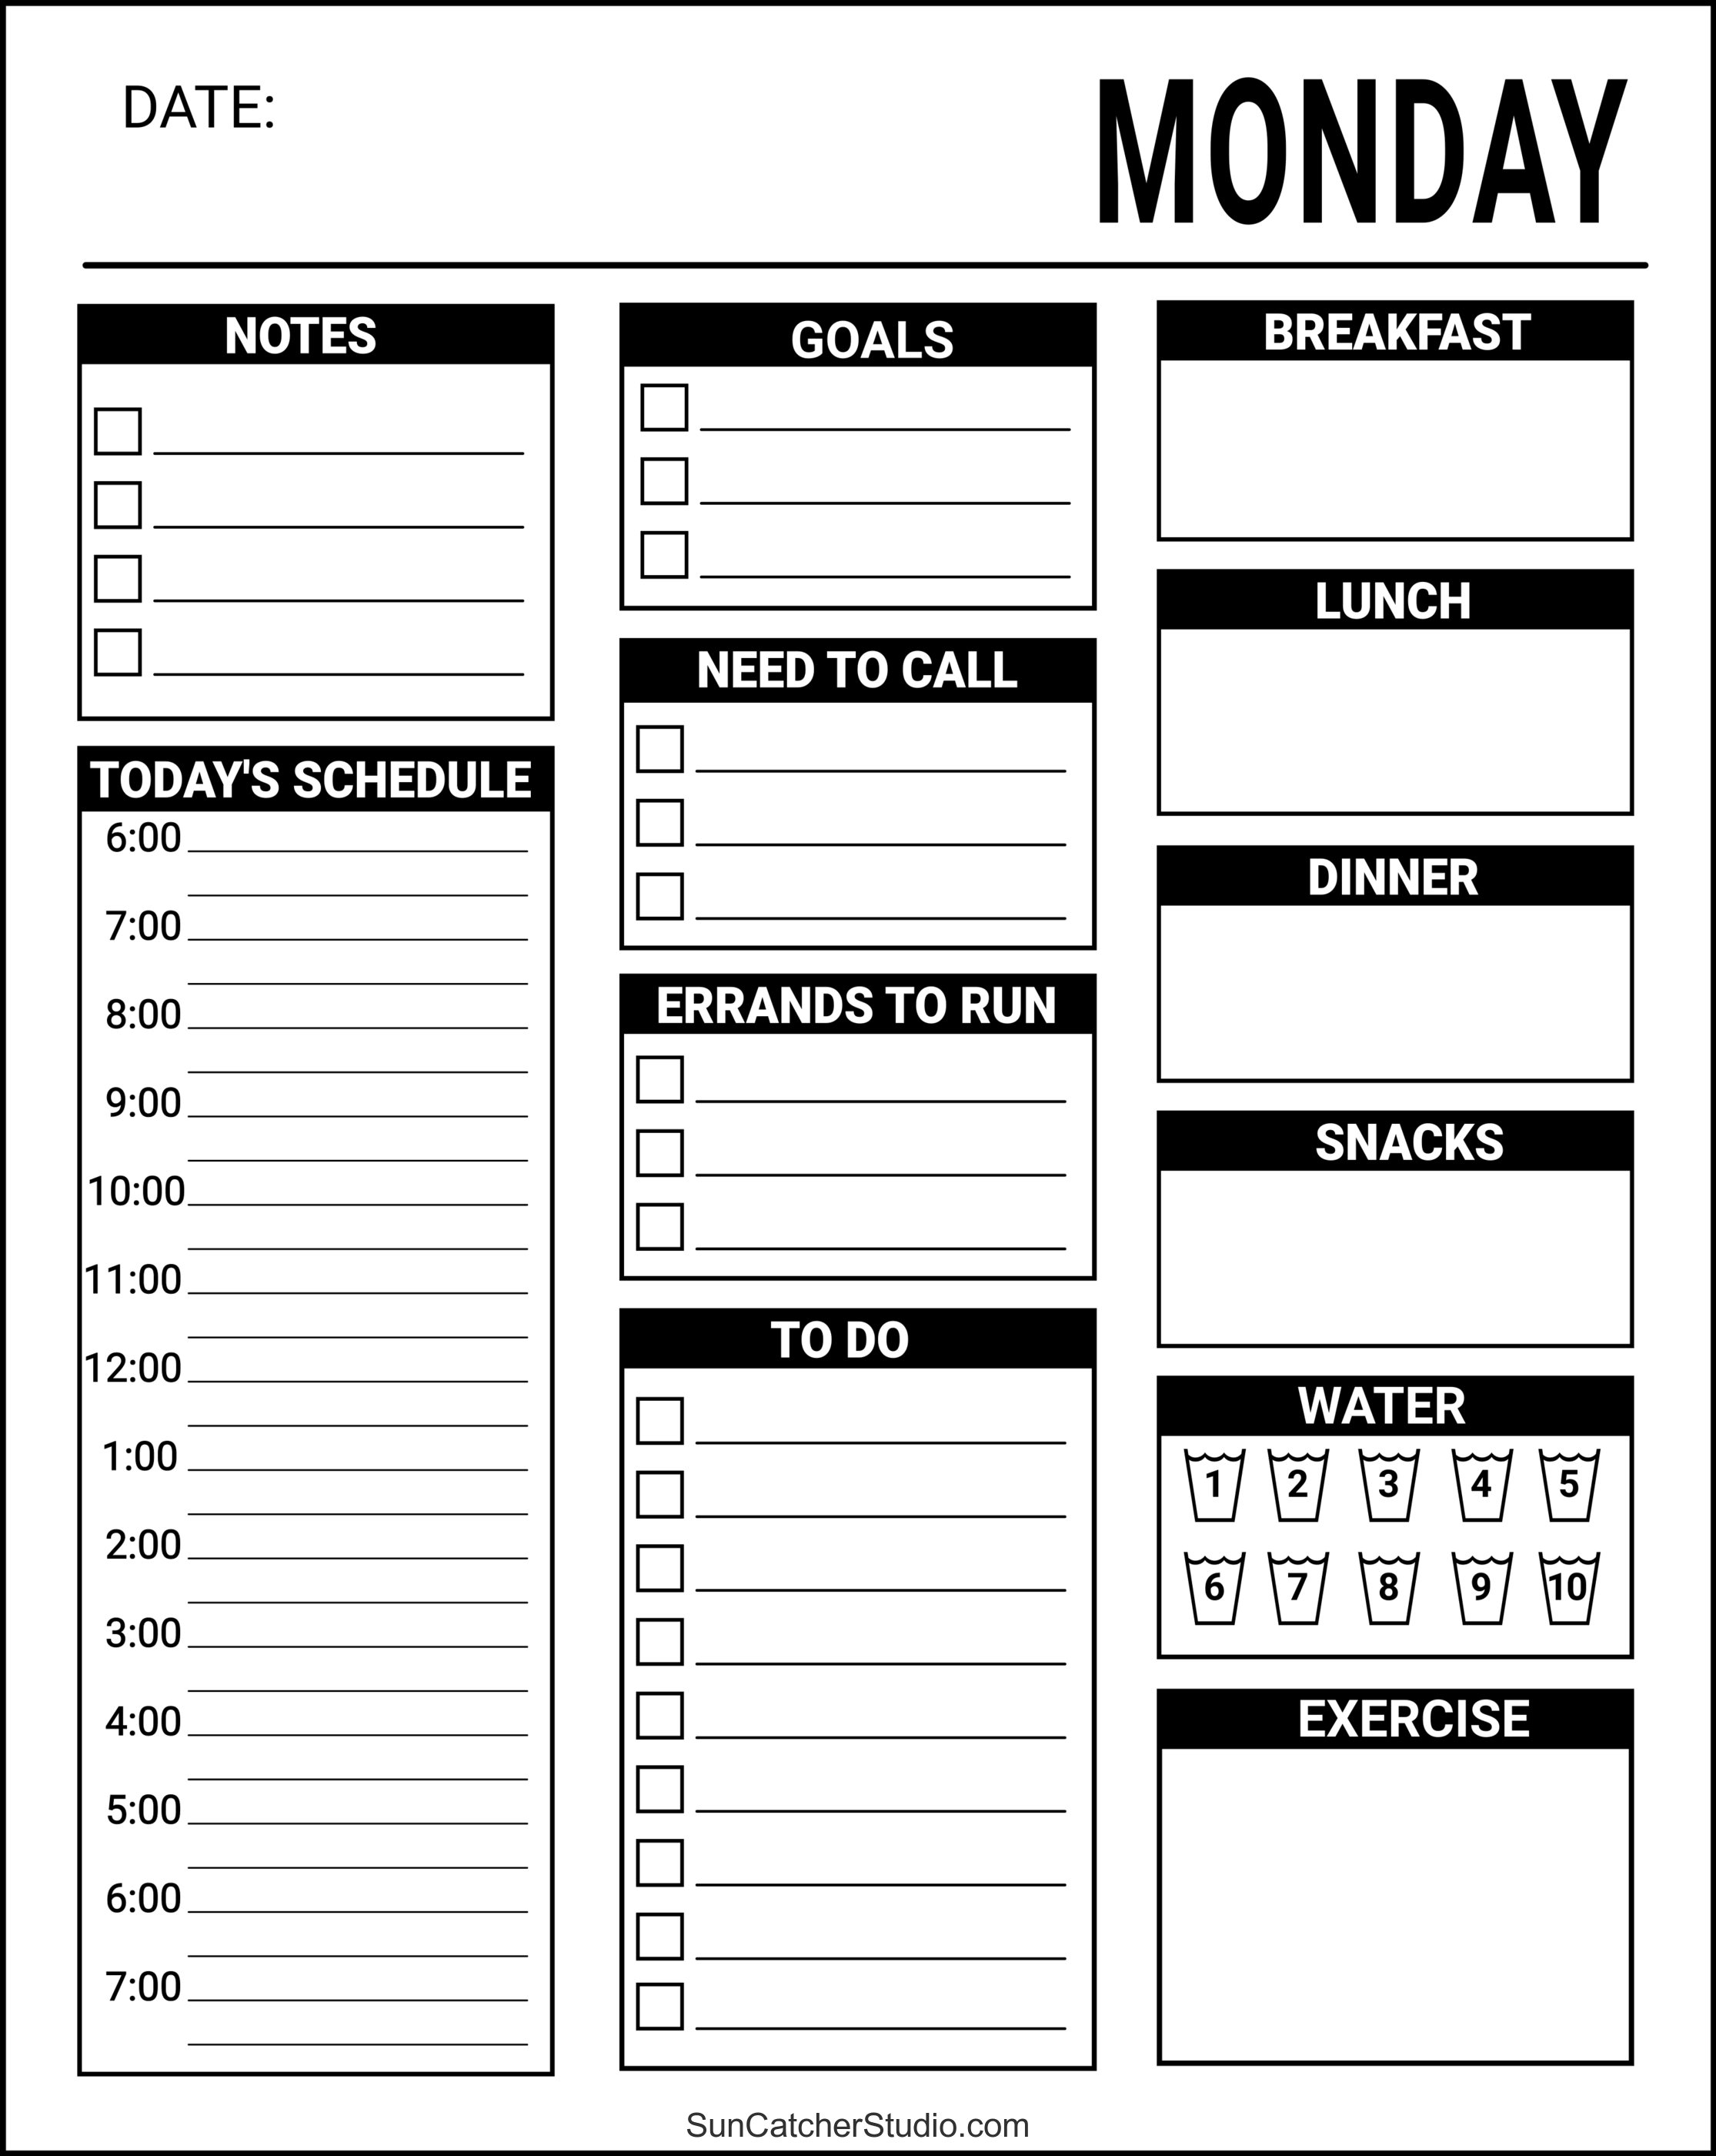 Appointment Book Free Printable: Get Organized and Save Time with Our